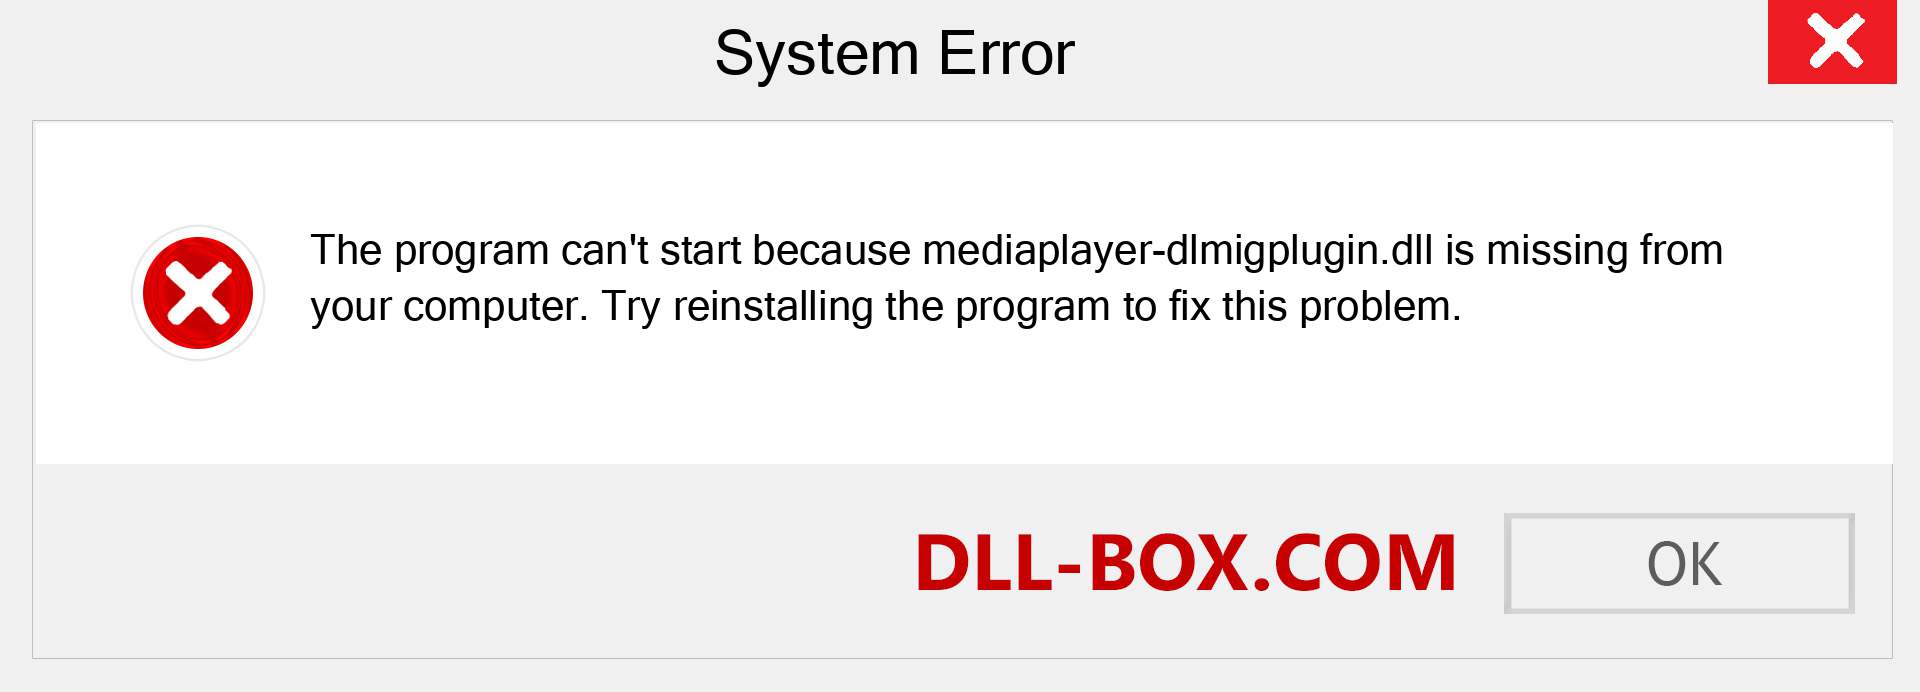  mediaplayer-dlmigplugin.dll file is missing?. Download for Windows 7, 8, 10 - Fix  mediaplayer-dlmigplugin dll Missing Error on Windows, photos, images